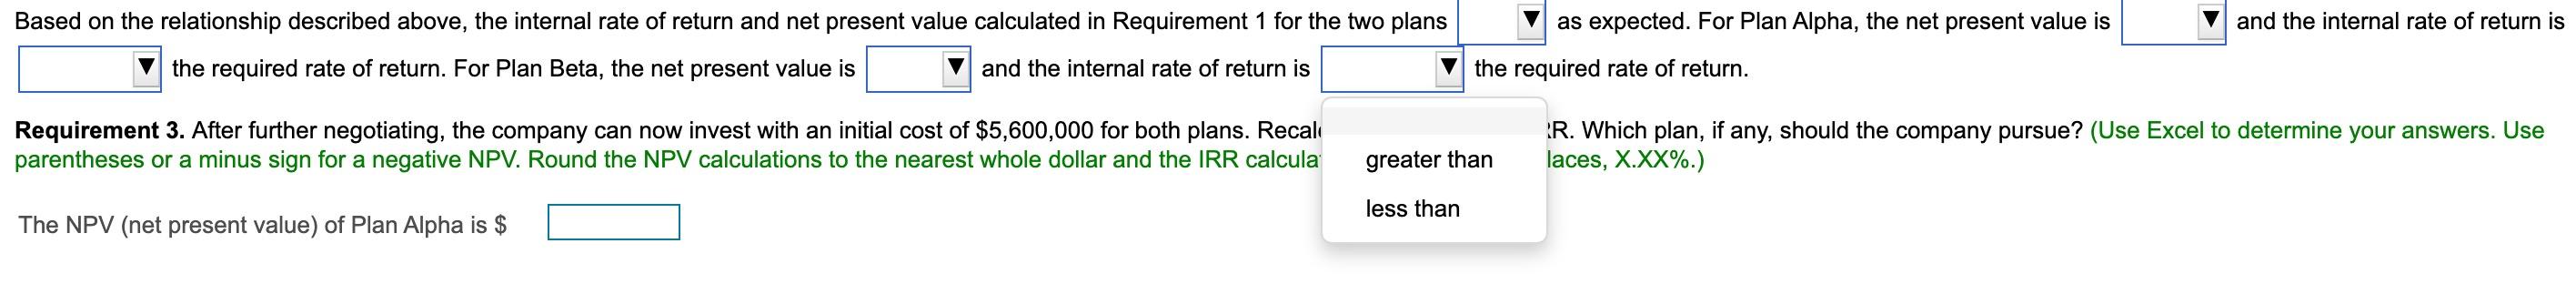 as expected. For Plan Alpha, the net present value is and the internal rate of return is Based on the relationship described